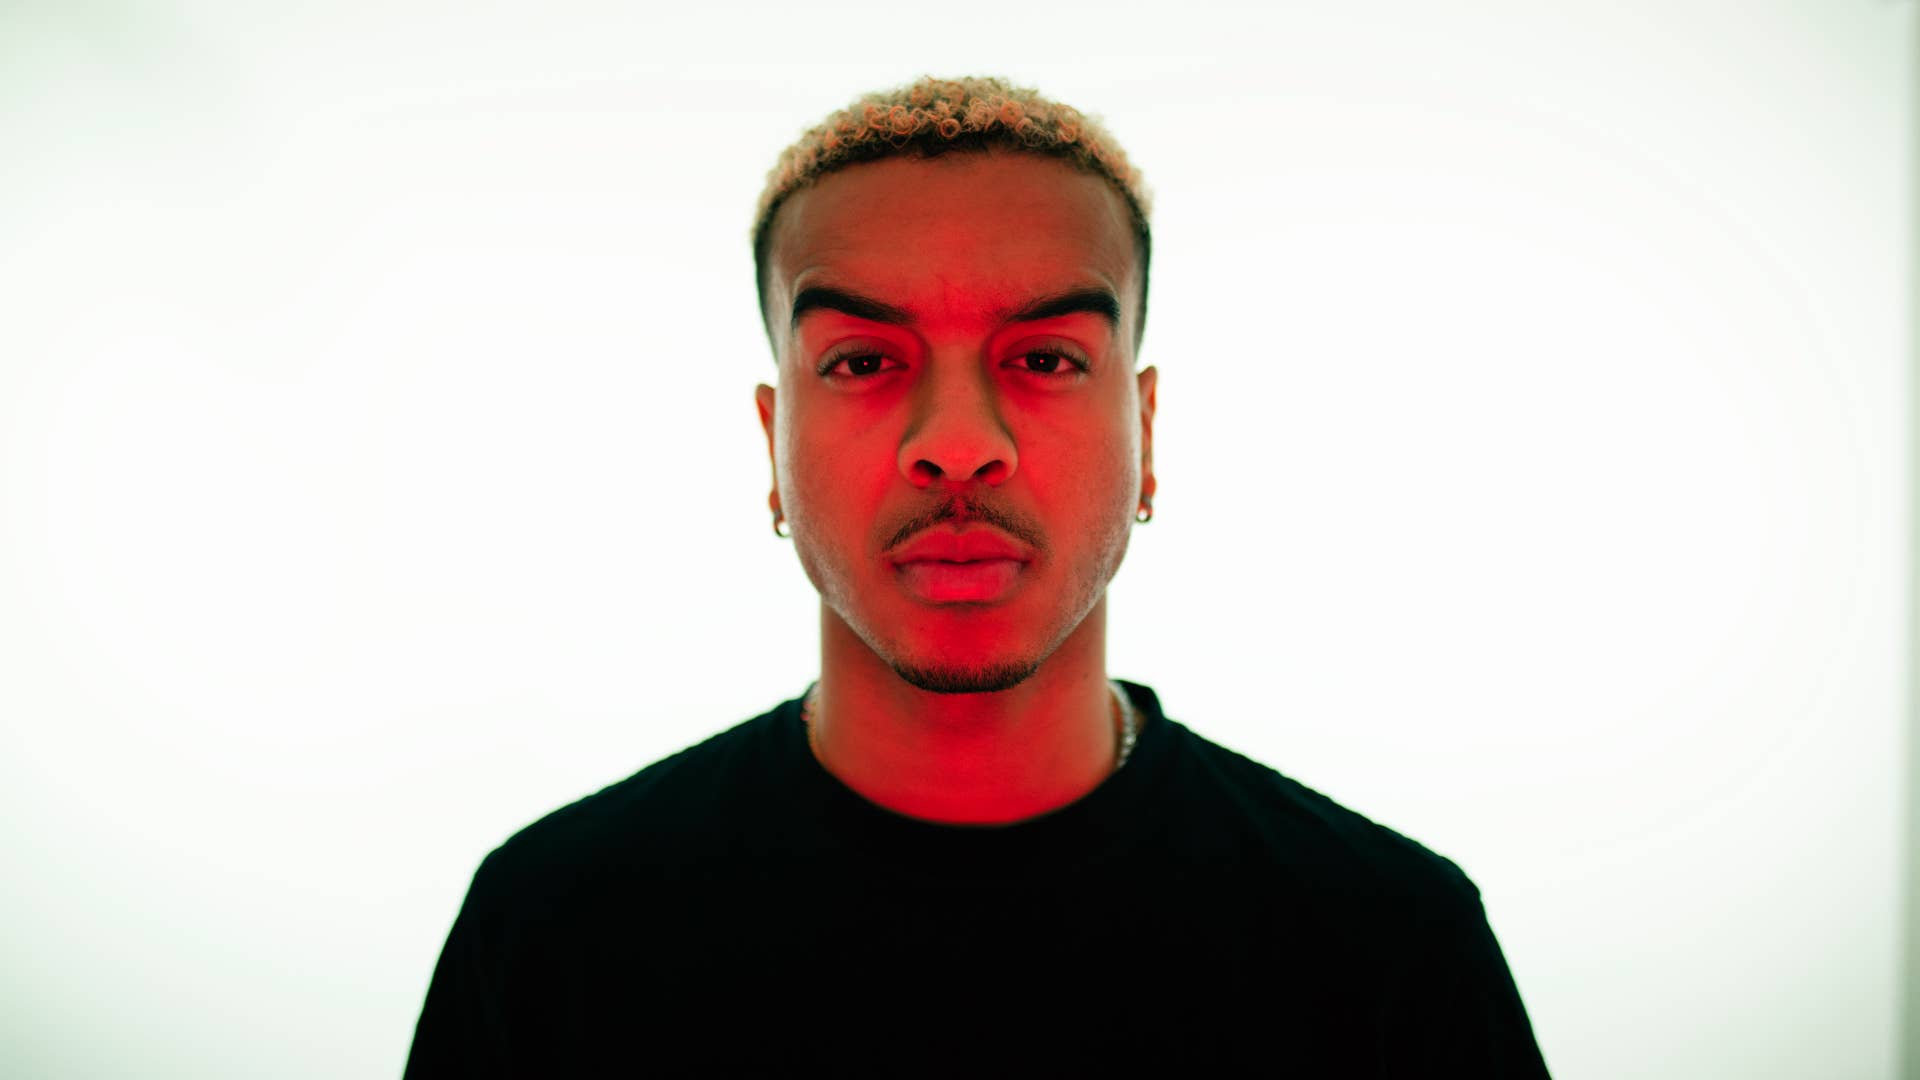 A photo of Sage Harris with red lighting on his face. He is wearing a black t-shirt against a white background.